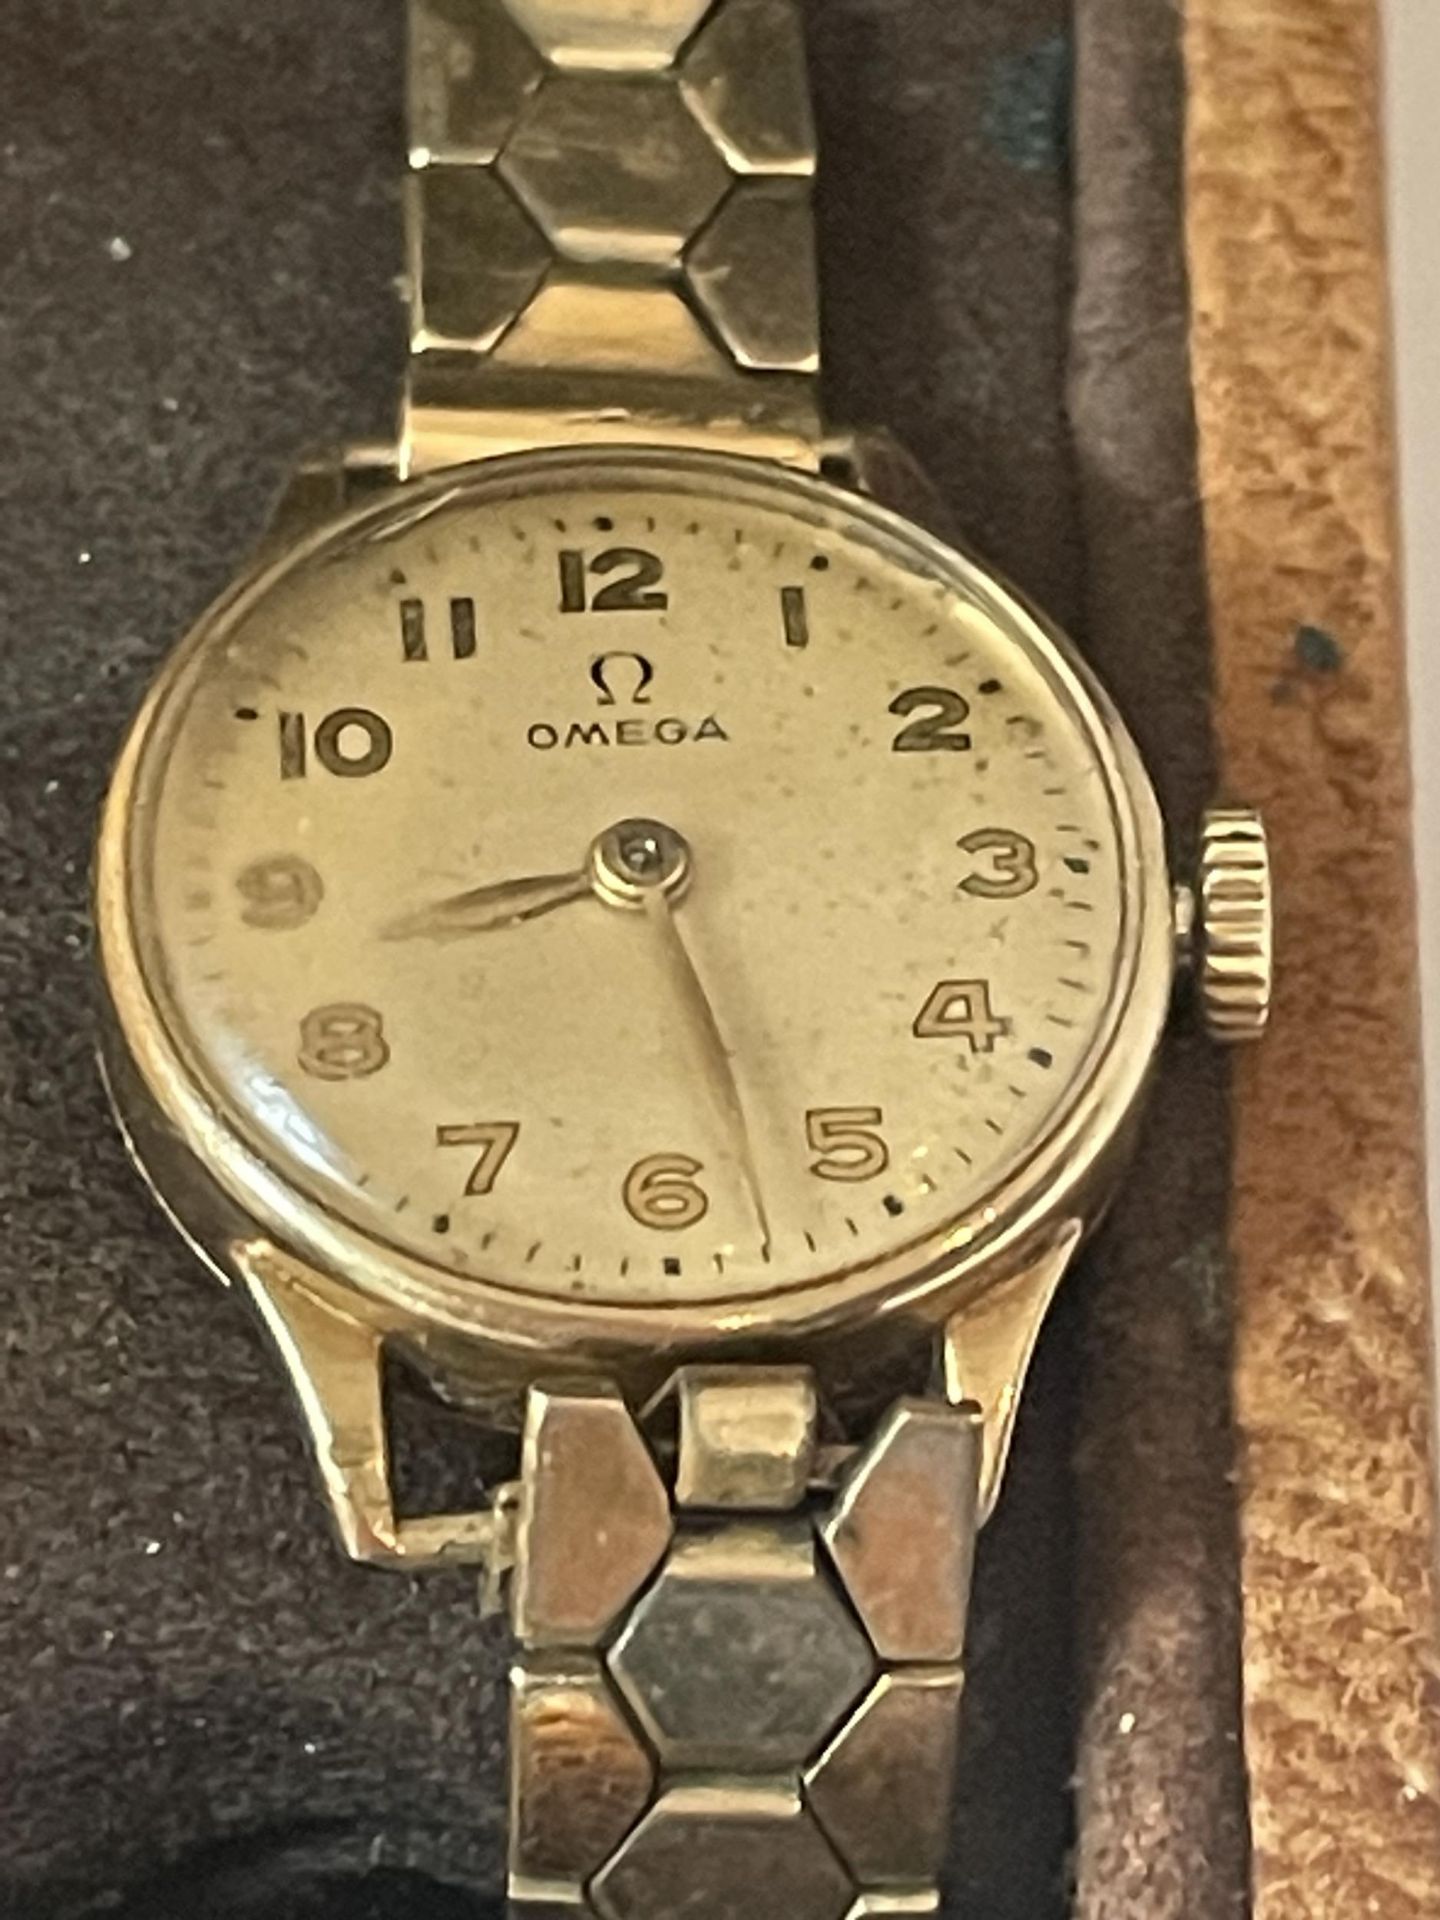 A LADIES OMEGA 9 CARAT GOLD WRIST WATCH WITH ROLLED GOLD STRAP IN ORIGINAL OMEGA CASE SEEN WORKING - Image 2 of 5